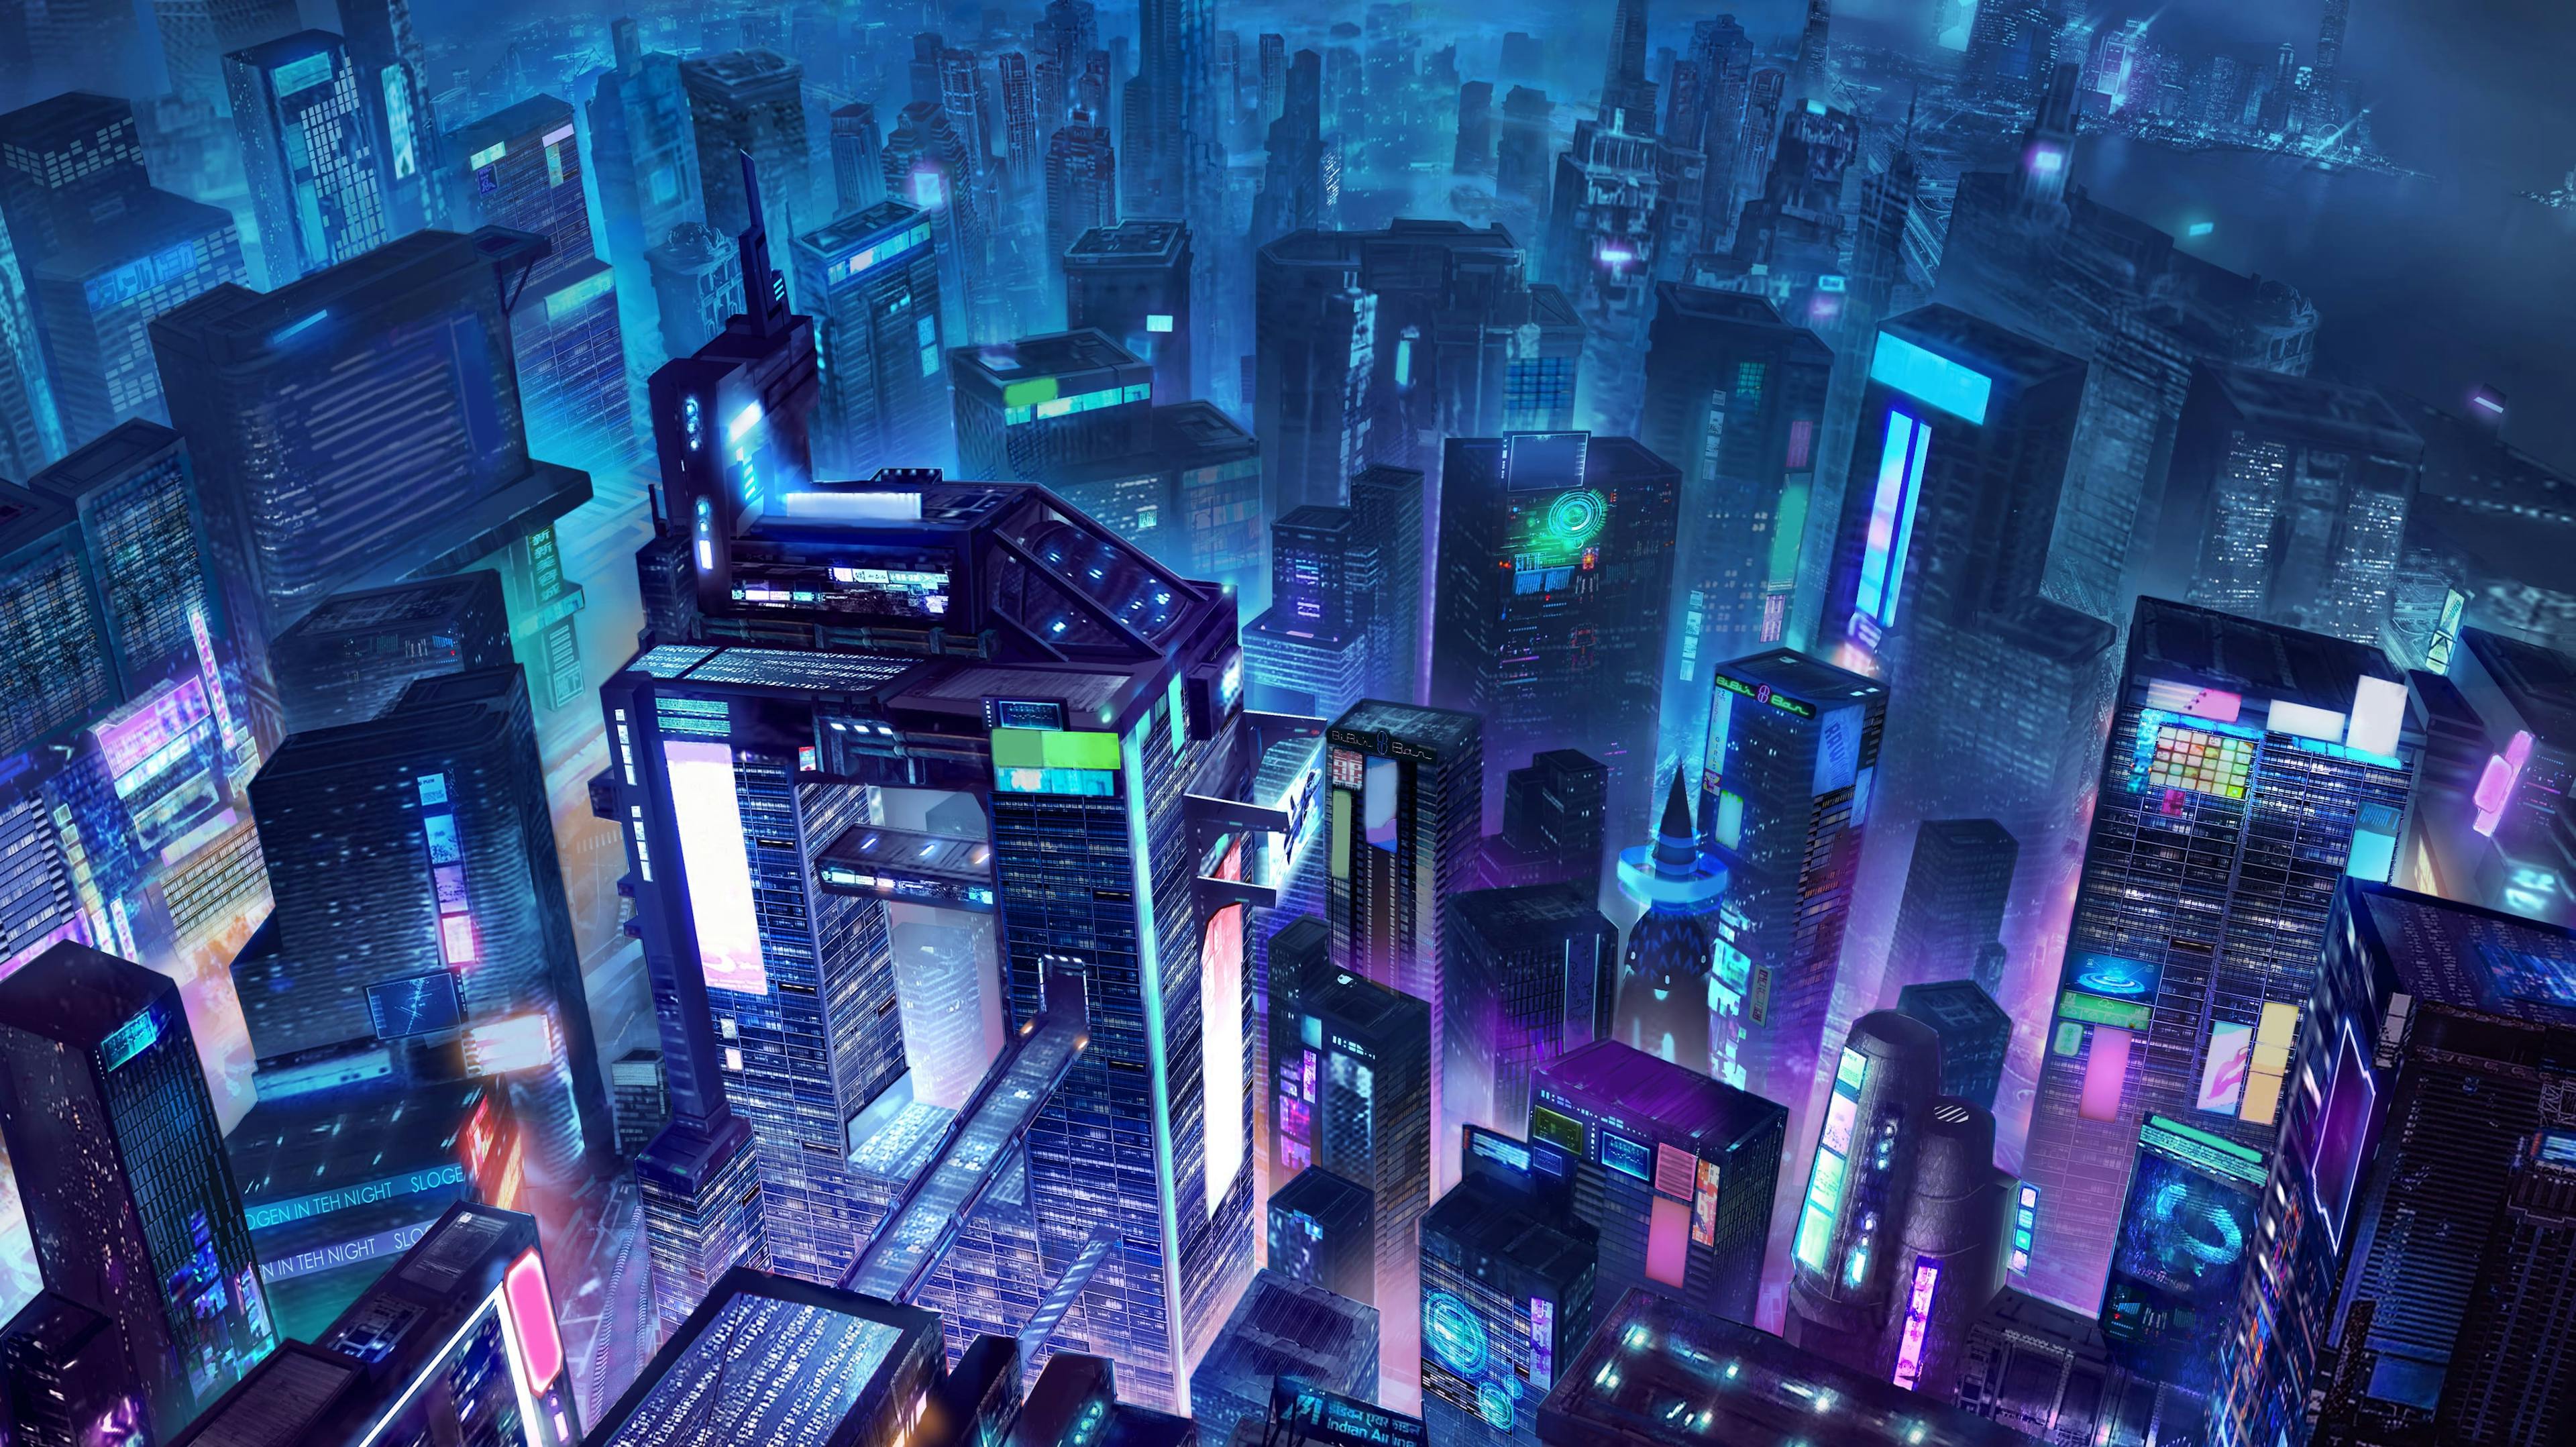 Cyberpunk Red: 5 Things to Know About Night City